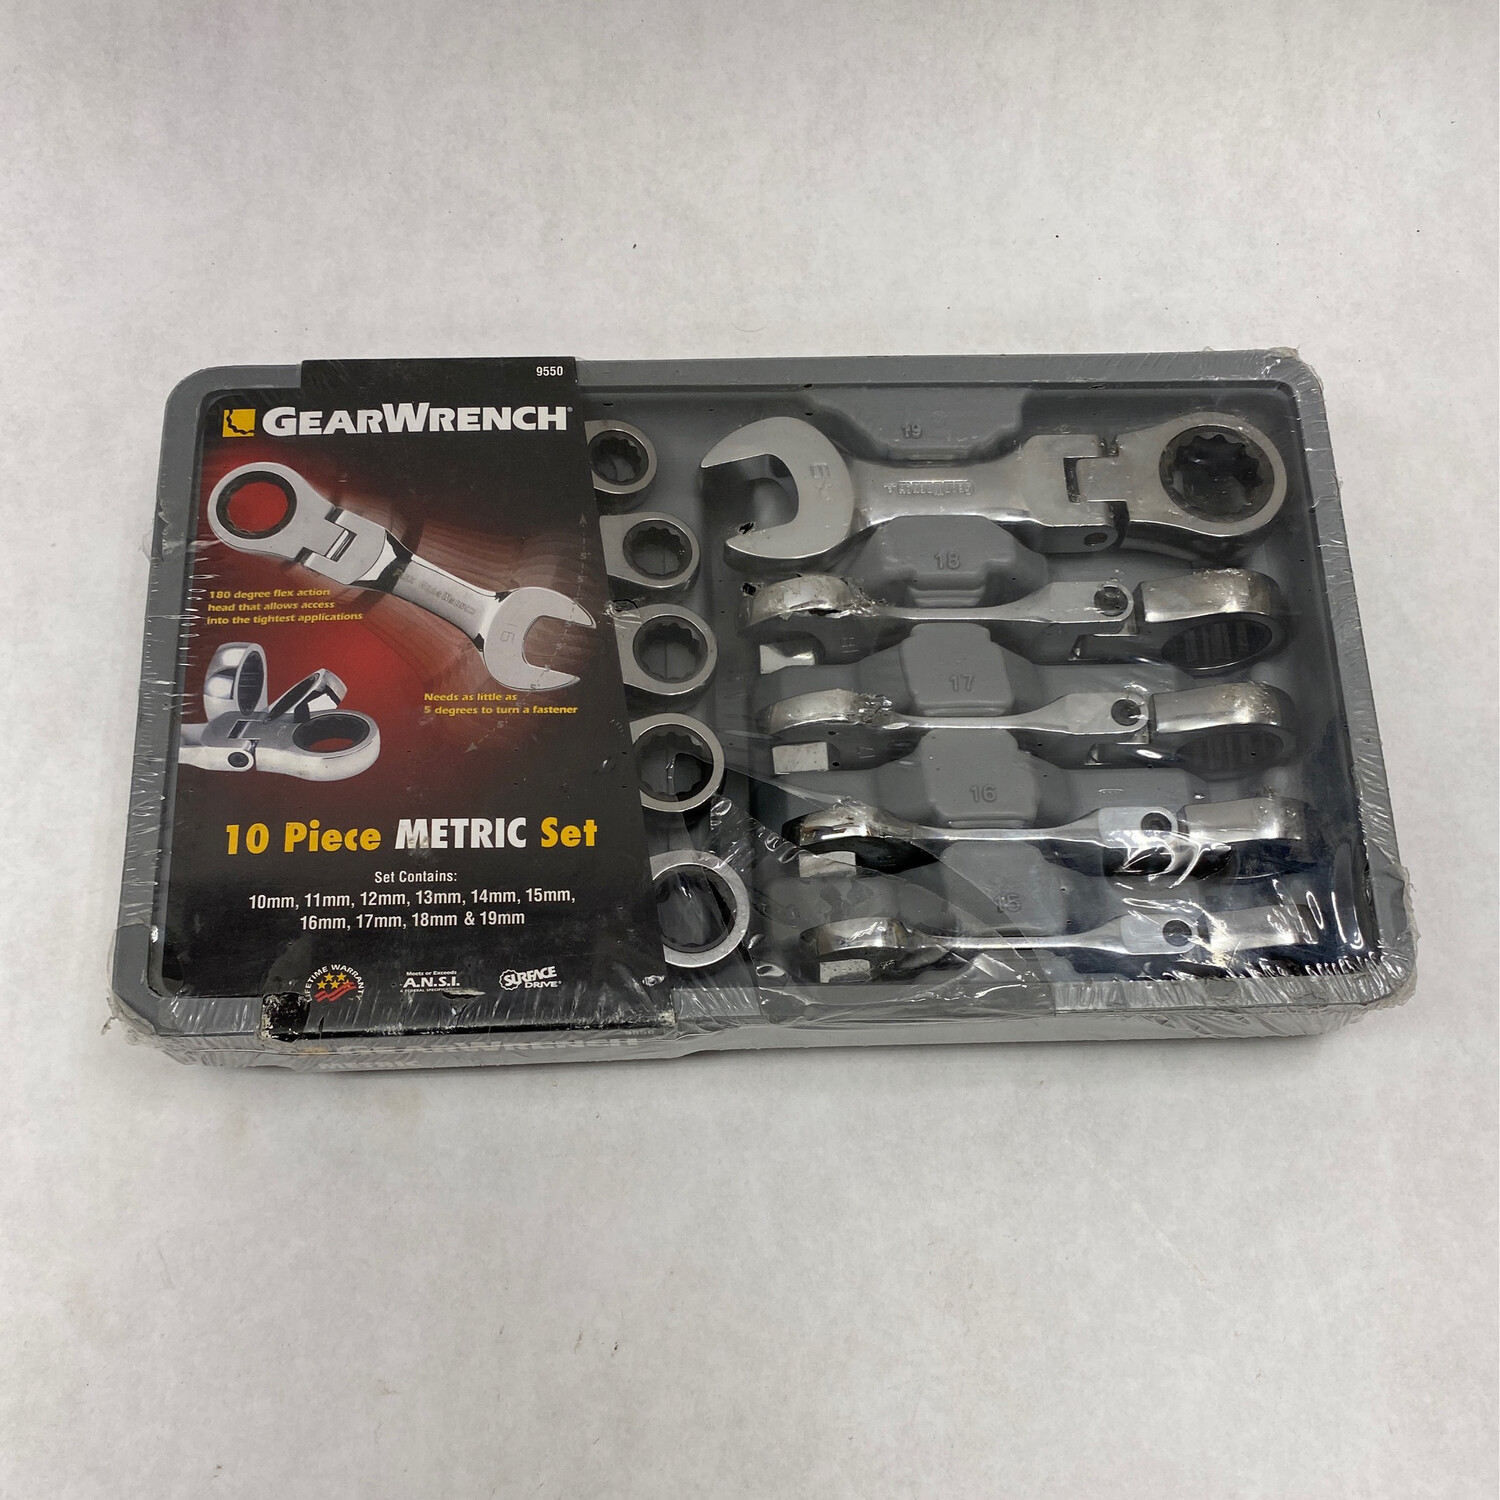 Gearwrench 10 Pc. Metric Flex Head Stubby Ratchet Wrench Set, 9550